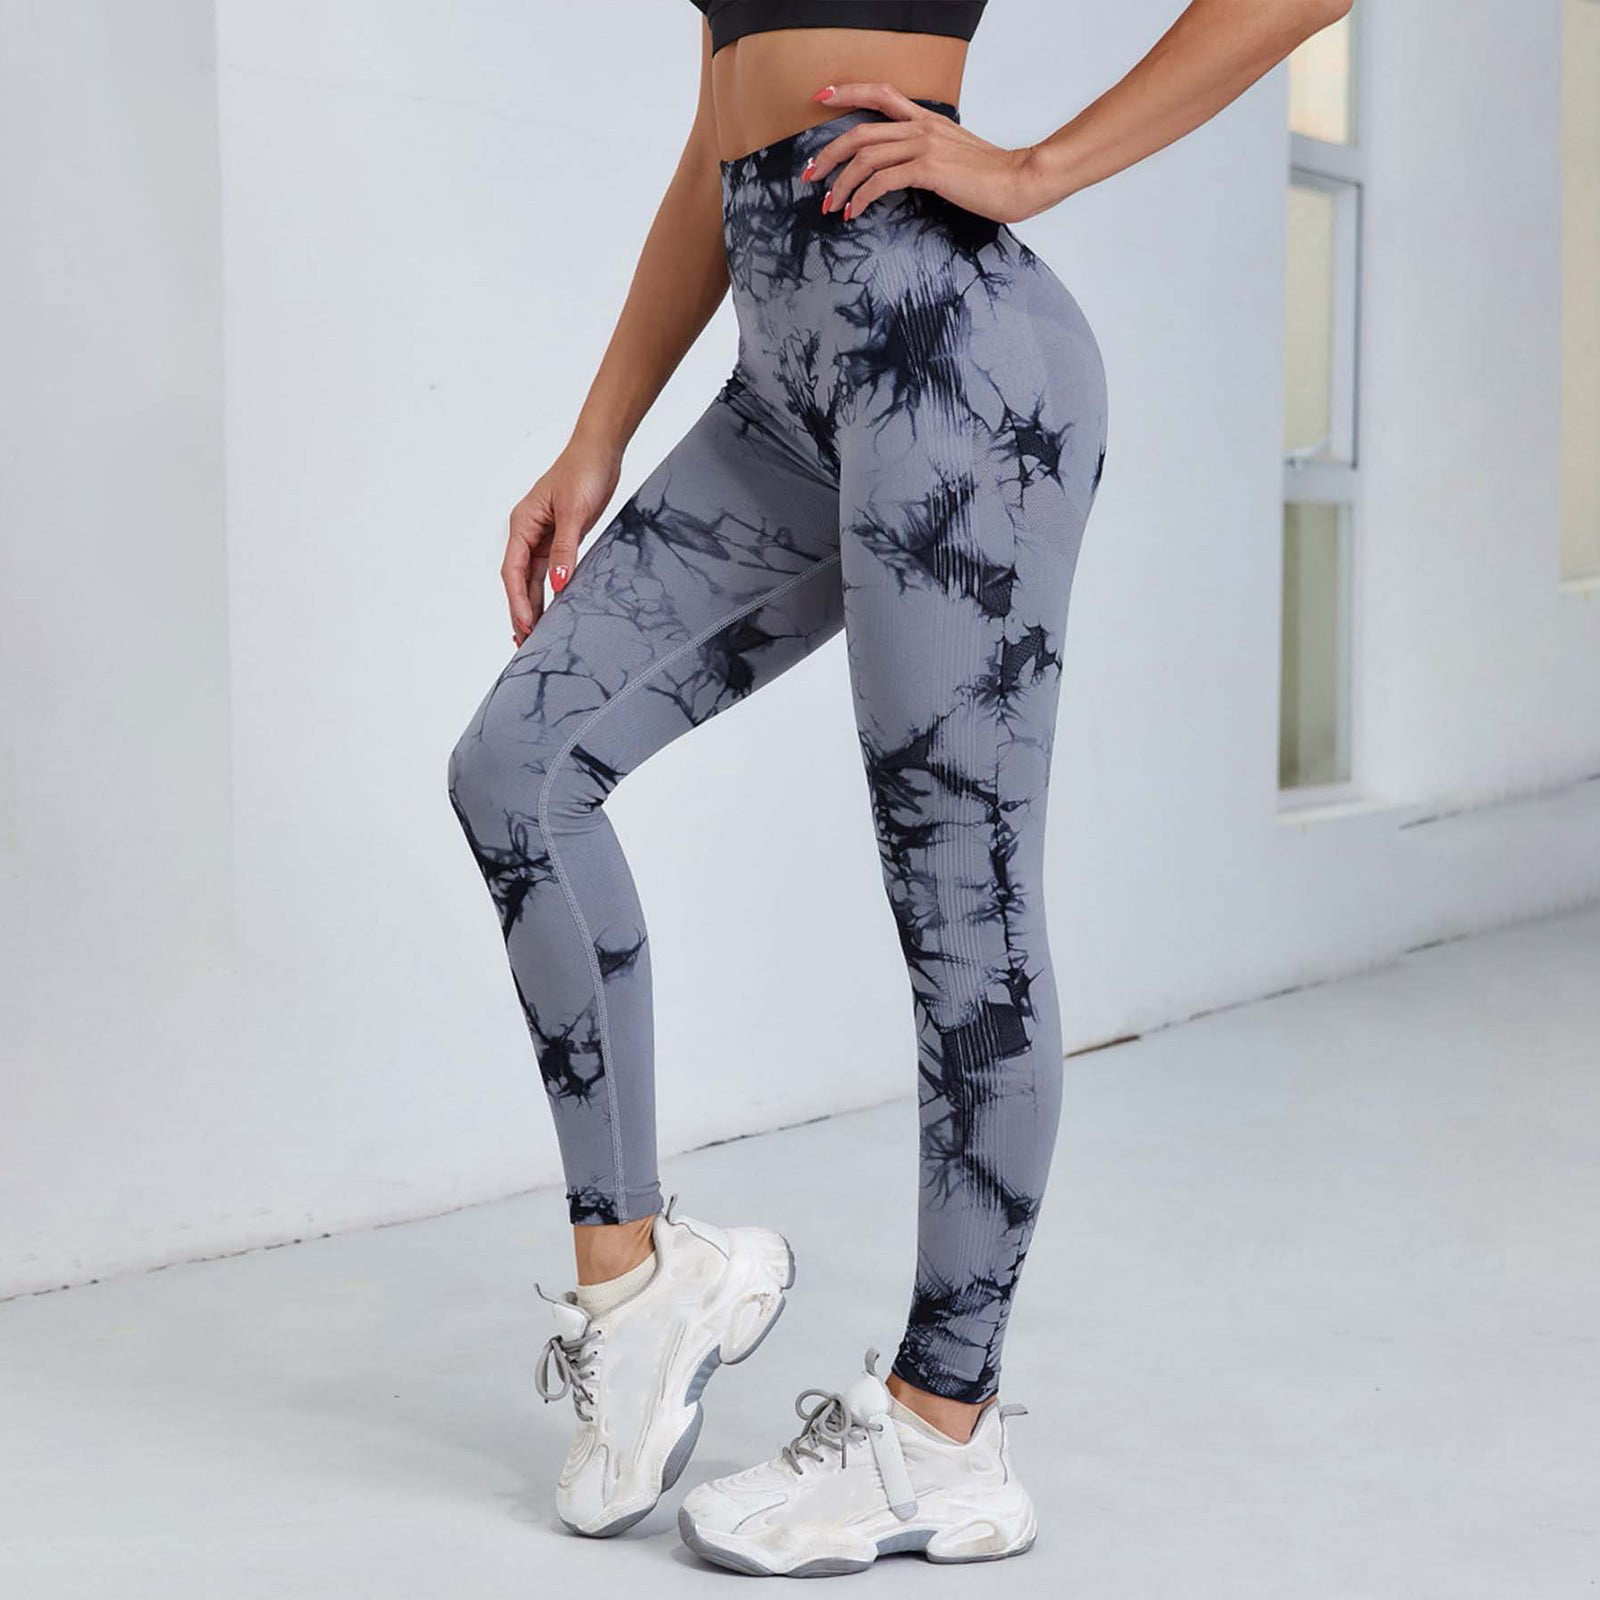 Gubotare Yoga Pants For Women With Pockets Women's Casual Bootleg